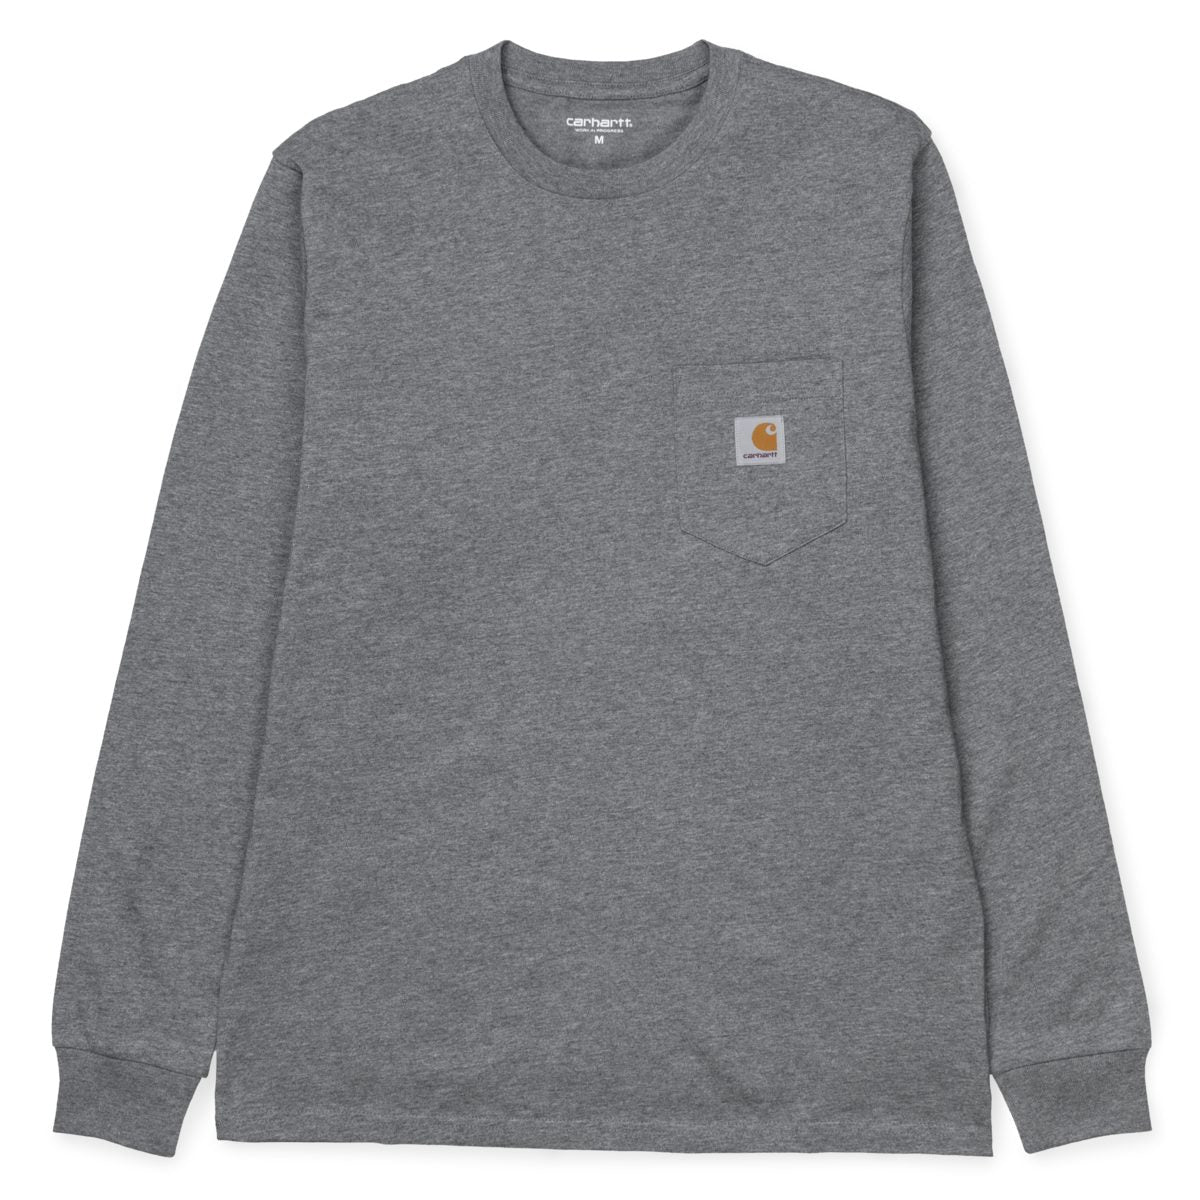 L/S Pocket T-shirt DARK GREY
The L/S Pocket T-Shirt is constructed from cotton jersey and features a chest pocket finished with a classic woven Carhartt WIP label.


100% Cotton, 190 g/sqm
regular fit
chest pocket
square label



I030437_02_XX
 CARHARTT WIP